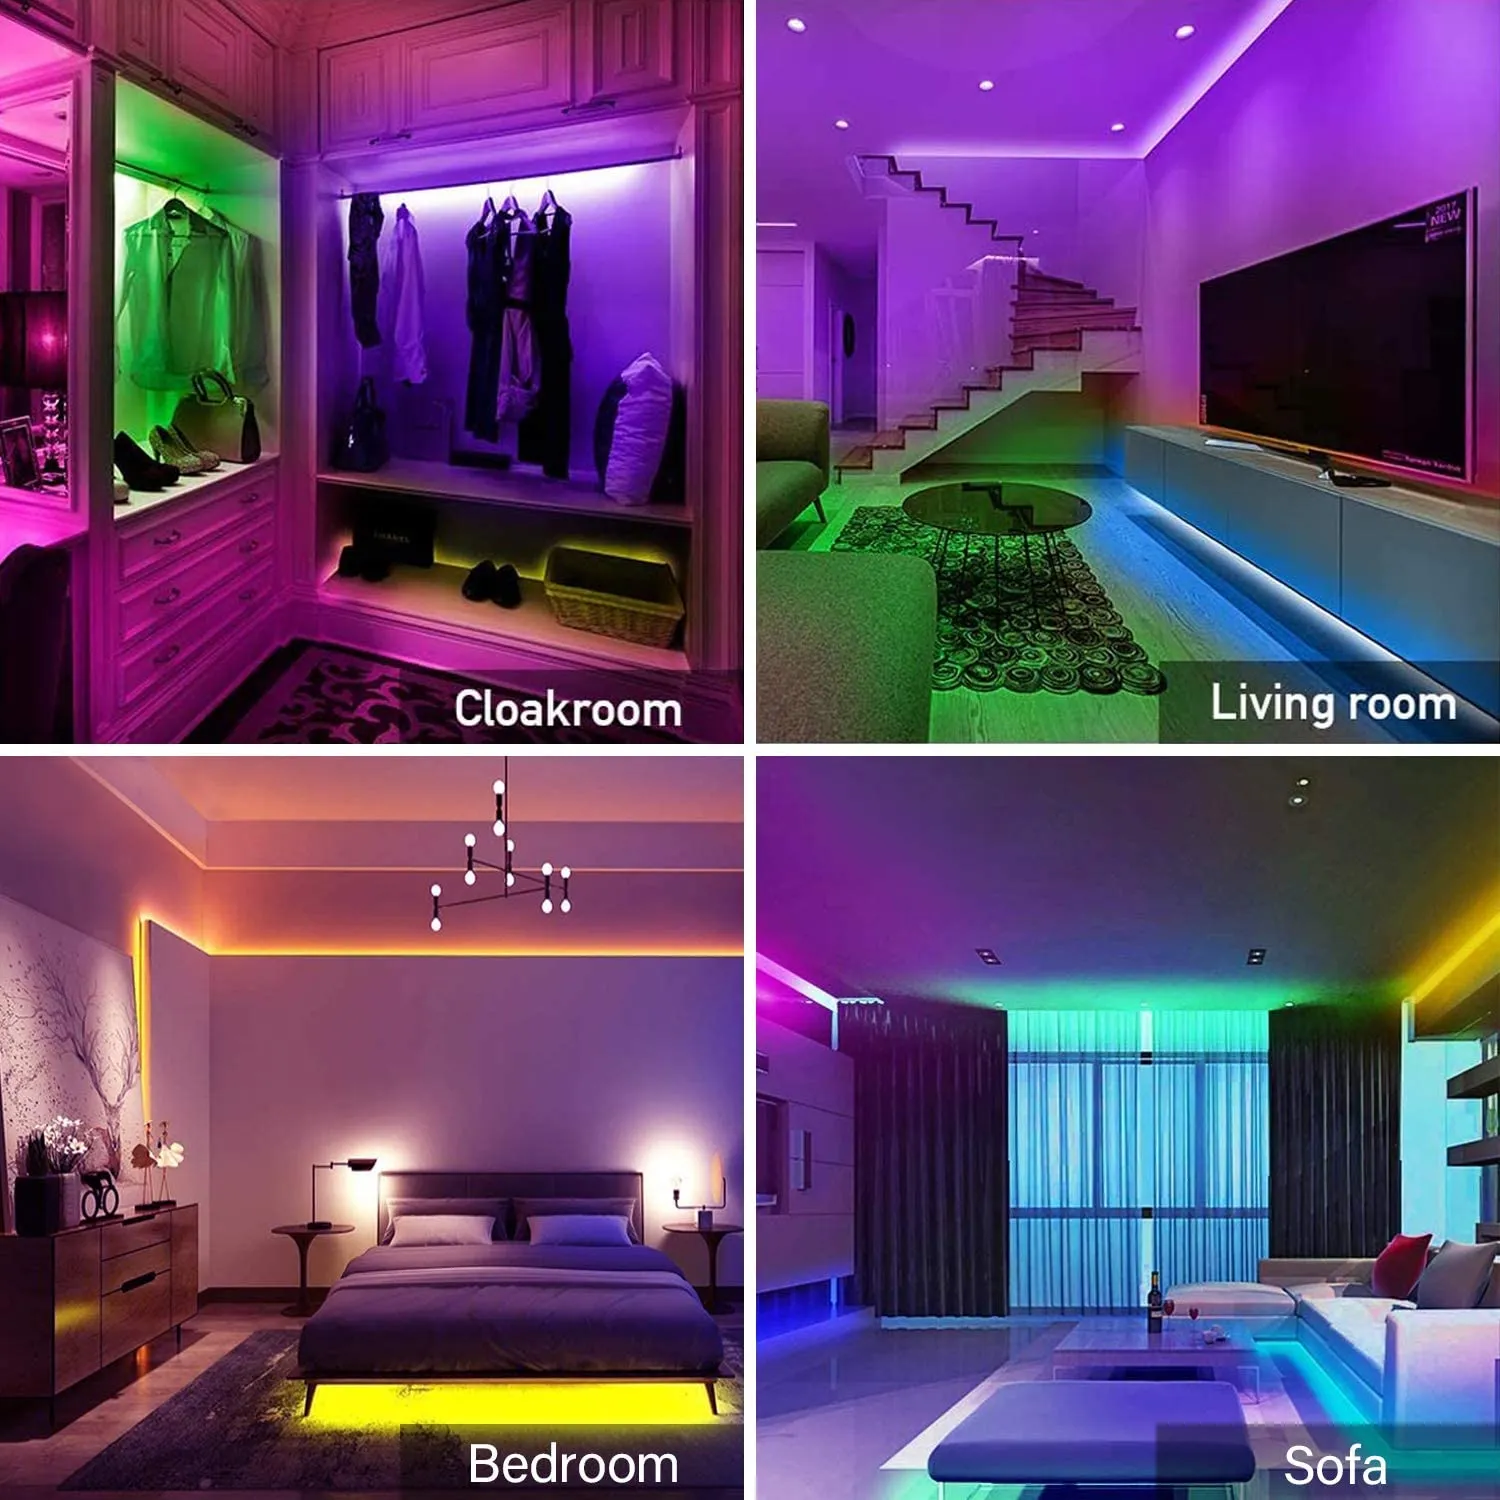 10M 12V MUSIC SYNC COLL CONTER CONTROL APP REMOTE LED Strip Lights for Bedroom Party Home Decoration8899217